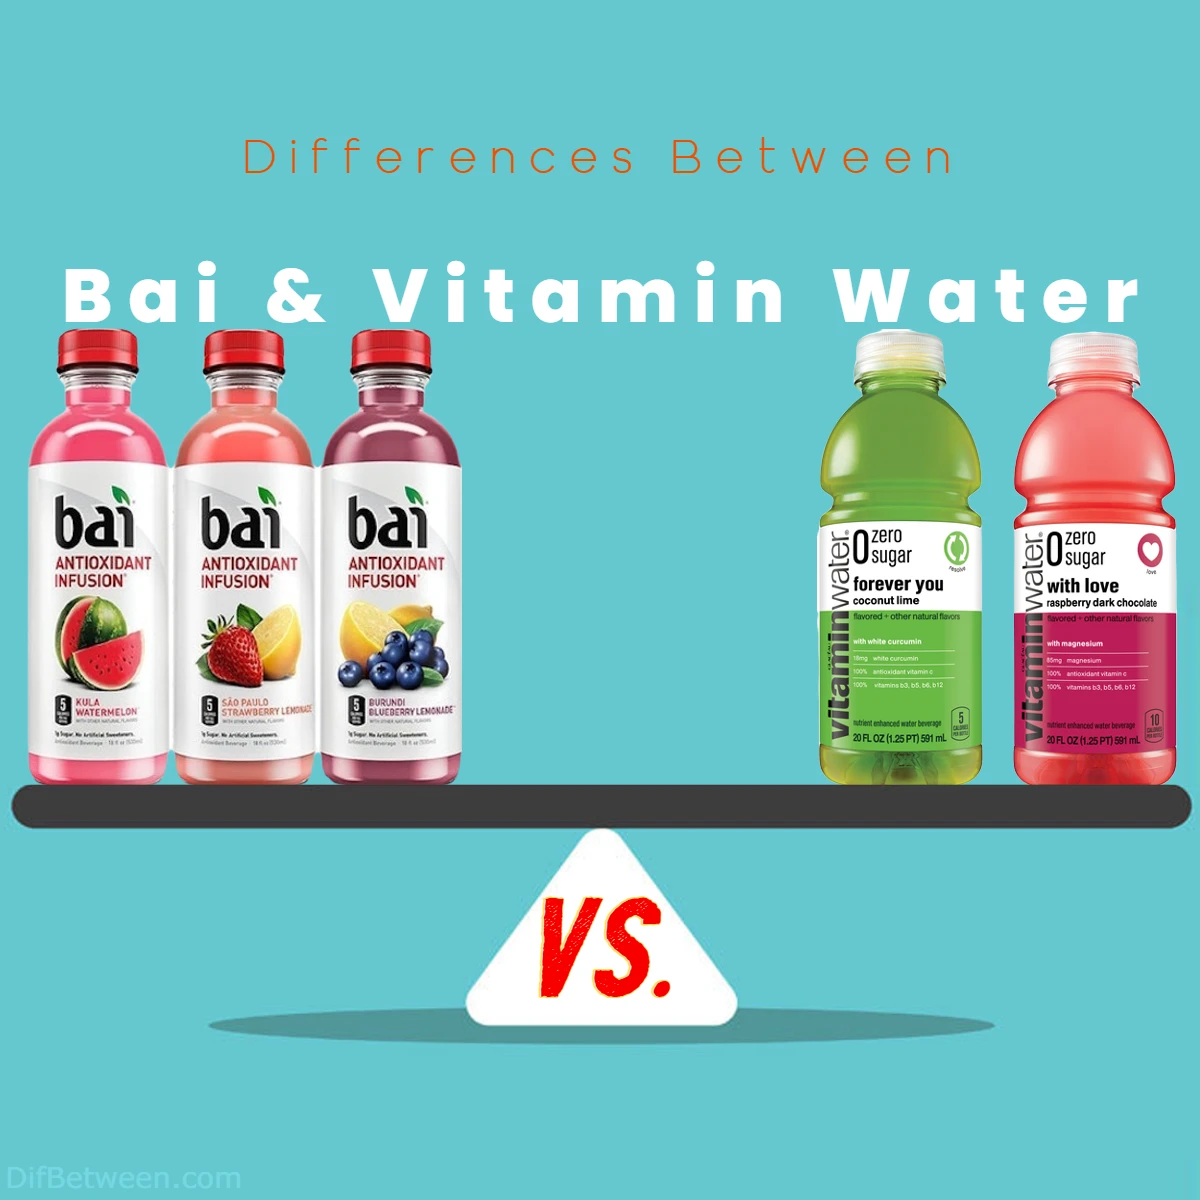 Differences Between Vitamin Water and Bai